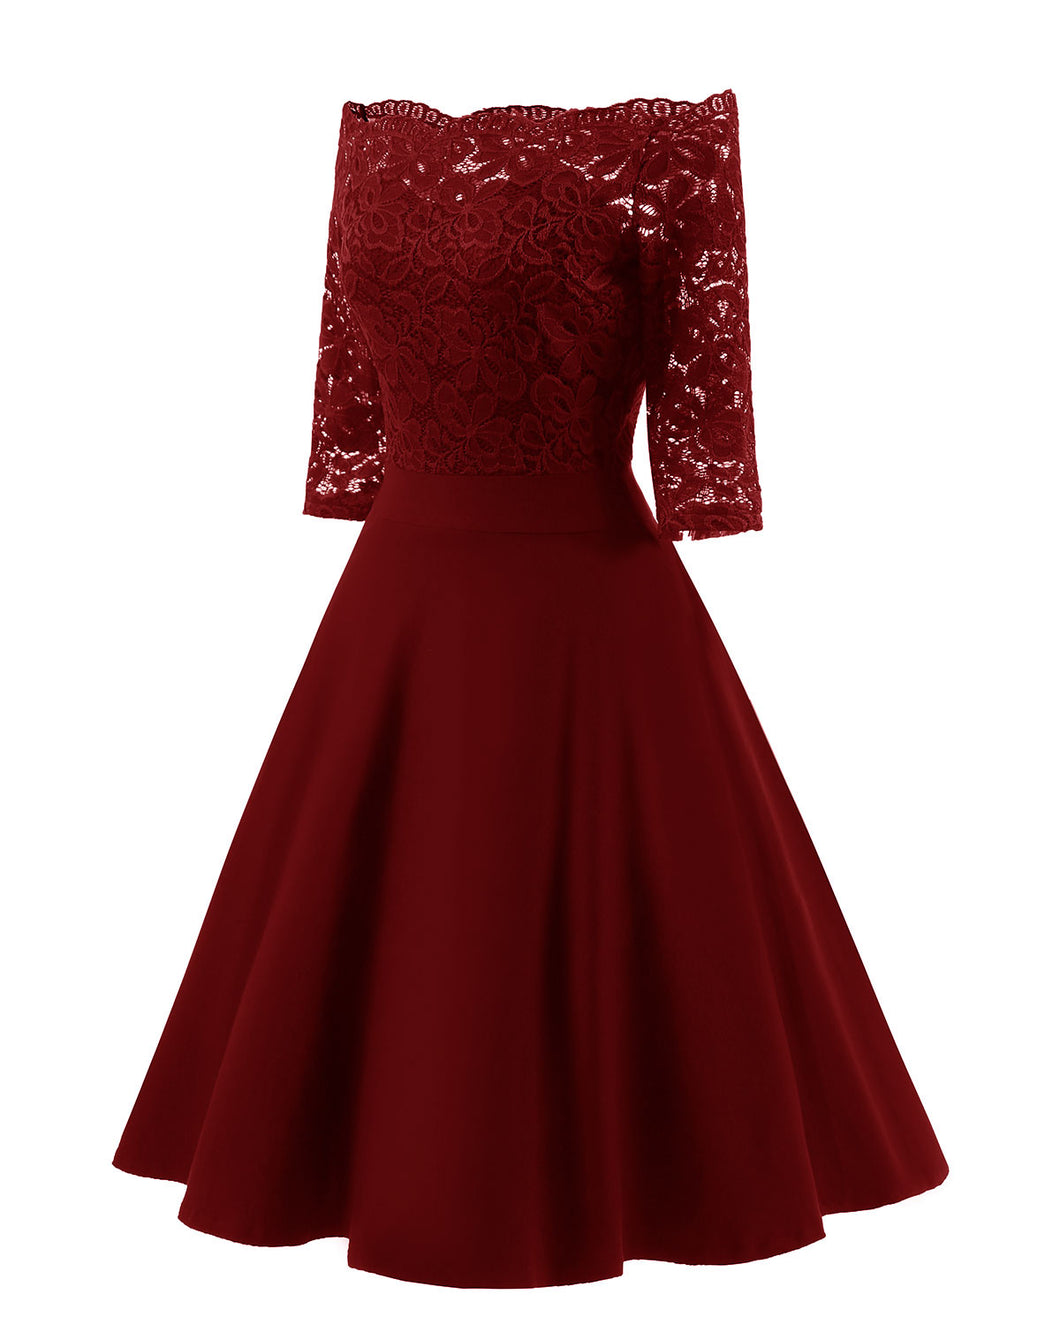 Short Burgundy Bridesmaid Dresses One Shoulder Prom Dress with Sleeves ...